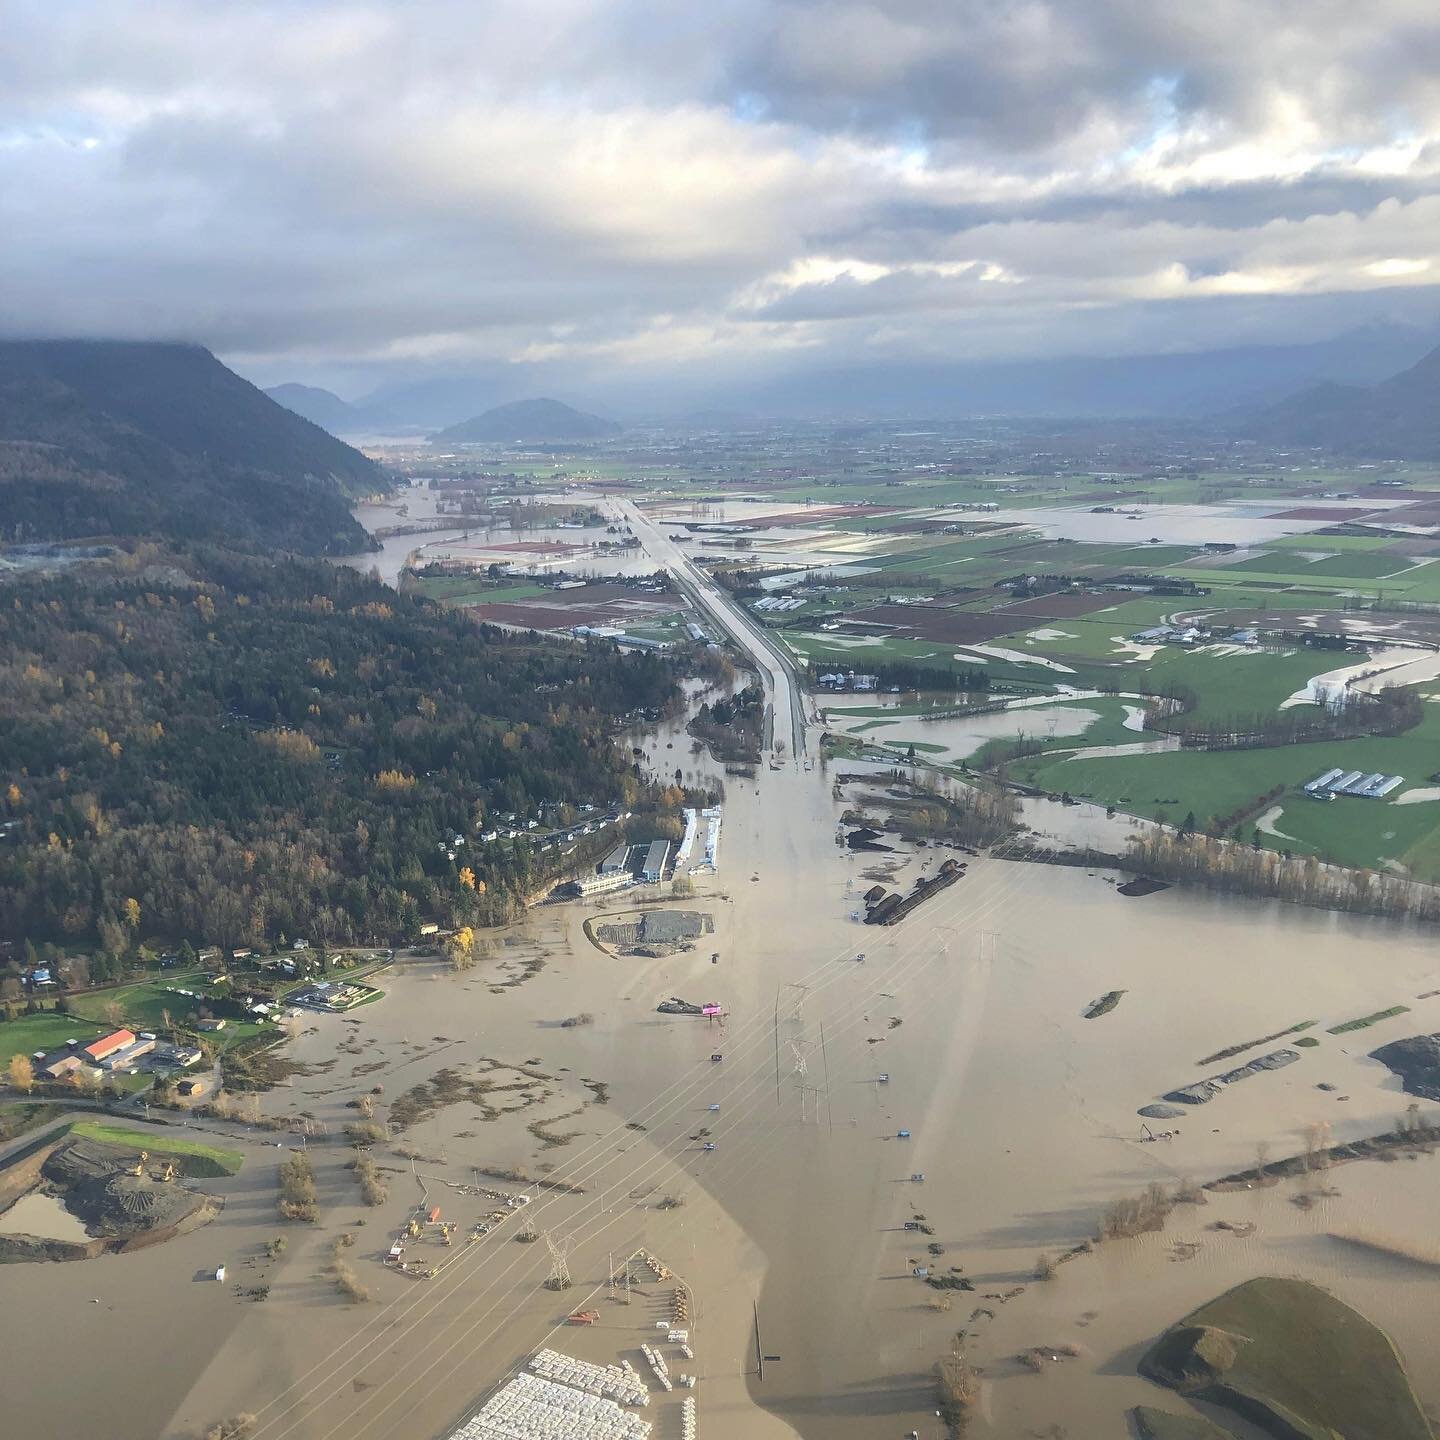 We are deeply saddened by the tragic floods that have occurred in B.C. and our thoughts are with everyone affected by this.
On Friday November 19, we will be donating $1 from each pint sold at the brewery and @lonsdalebridgedeck to @thisismylocality 